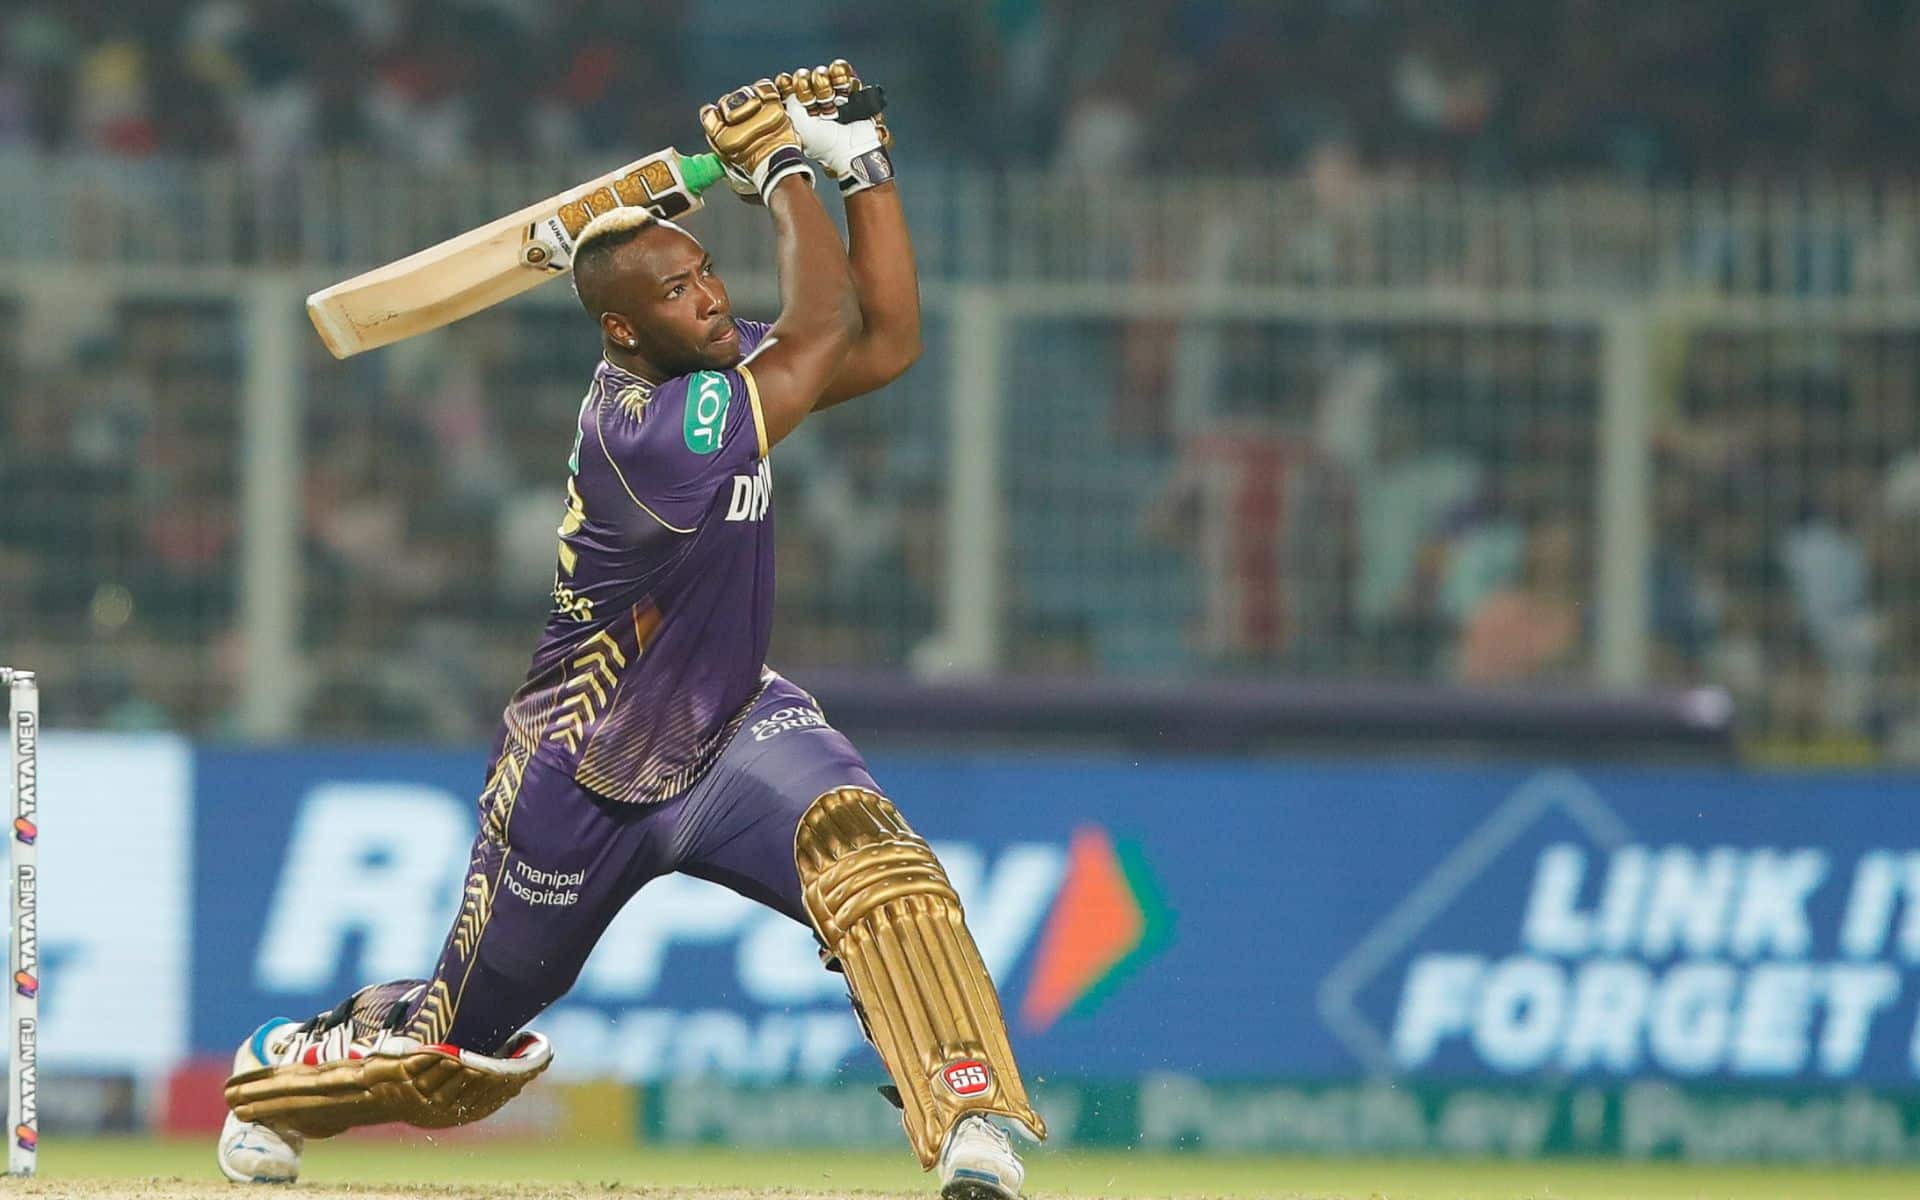 Andre Russell made his IPL debut for Delhi Daredevils (x.com)